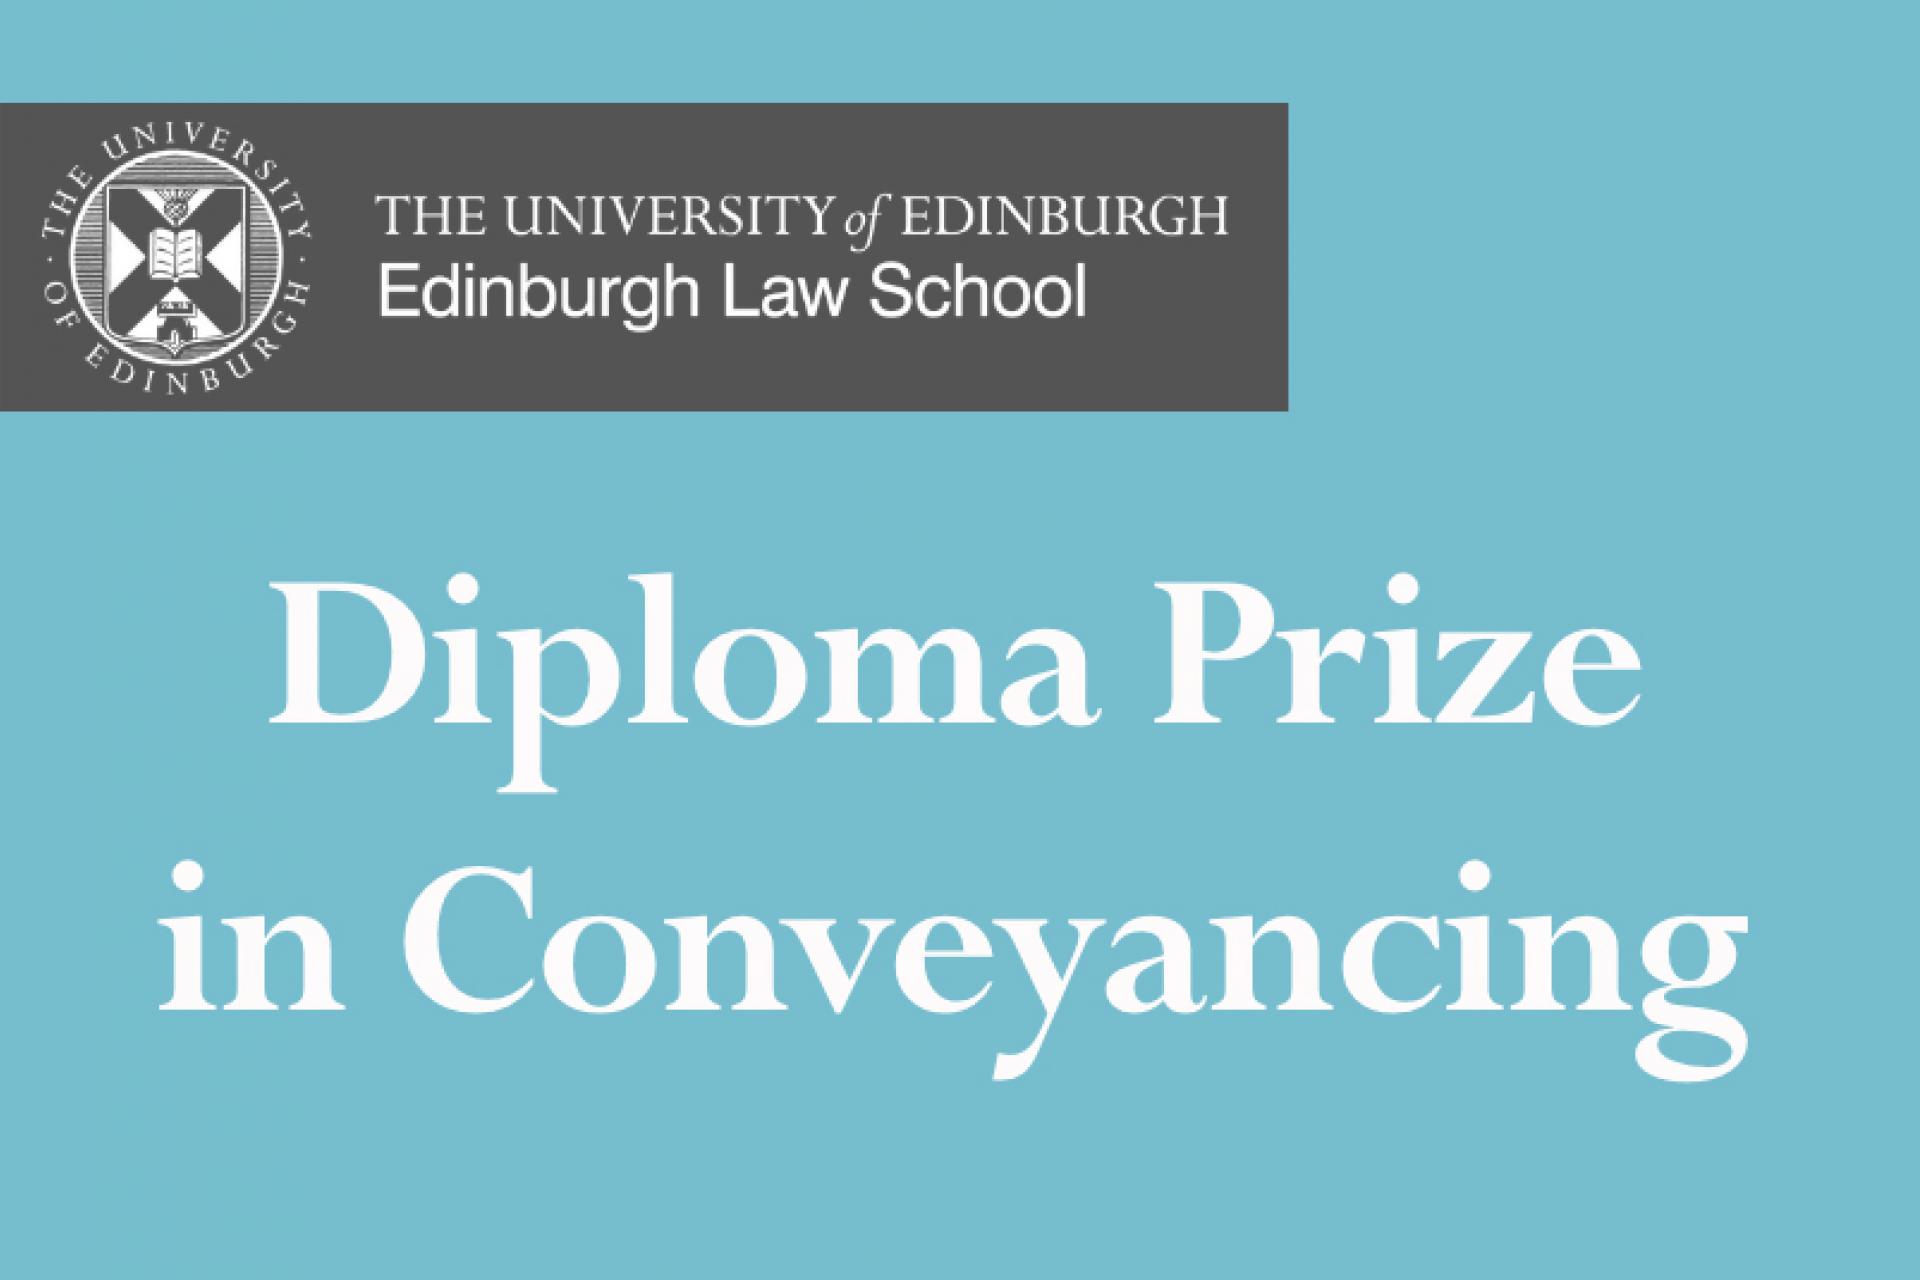 Diploma Prize in Conveyancing